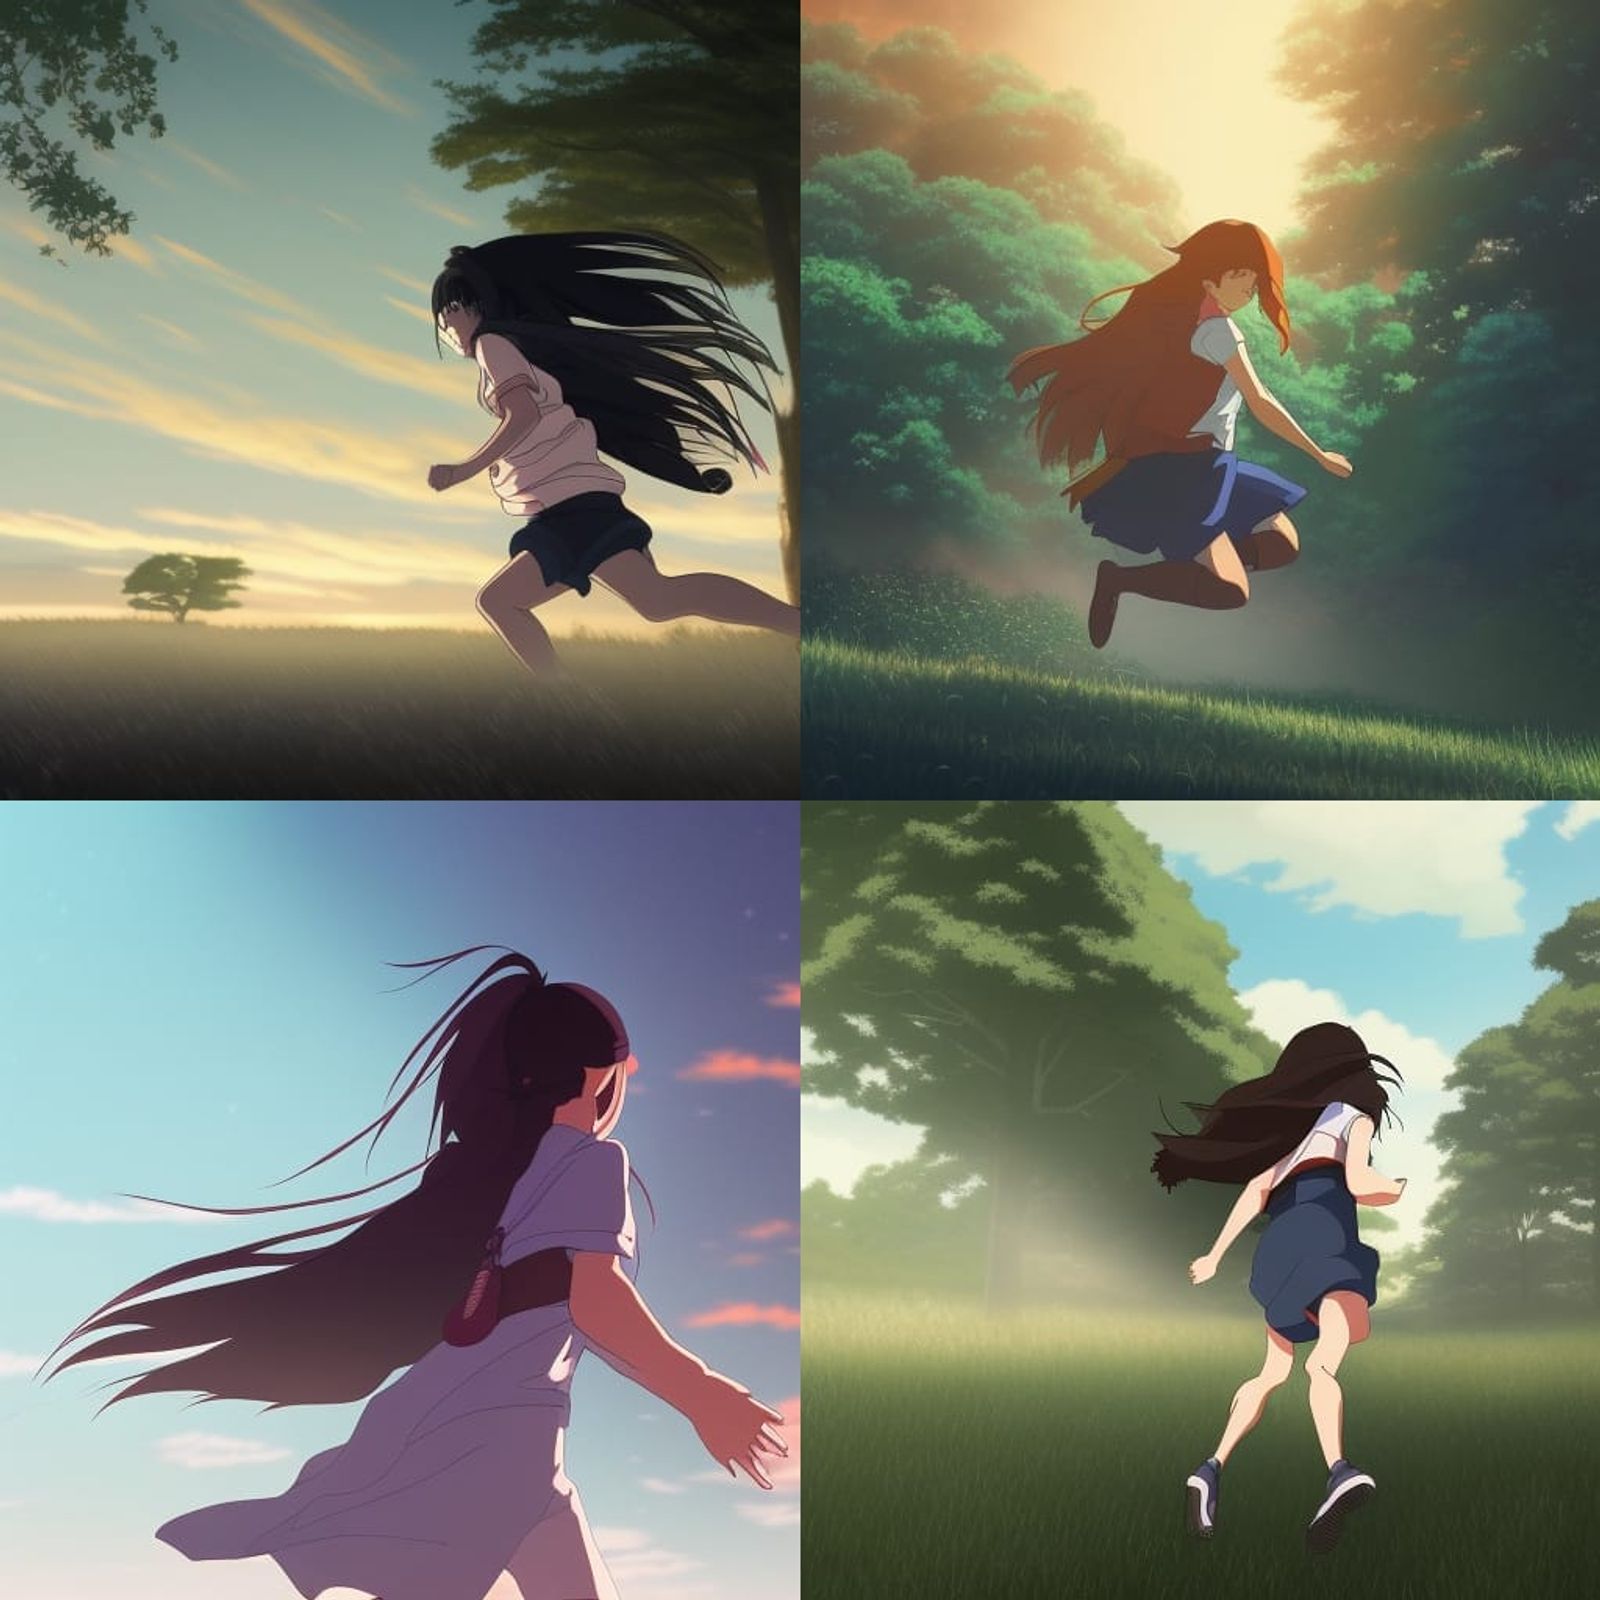 anime running side view